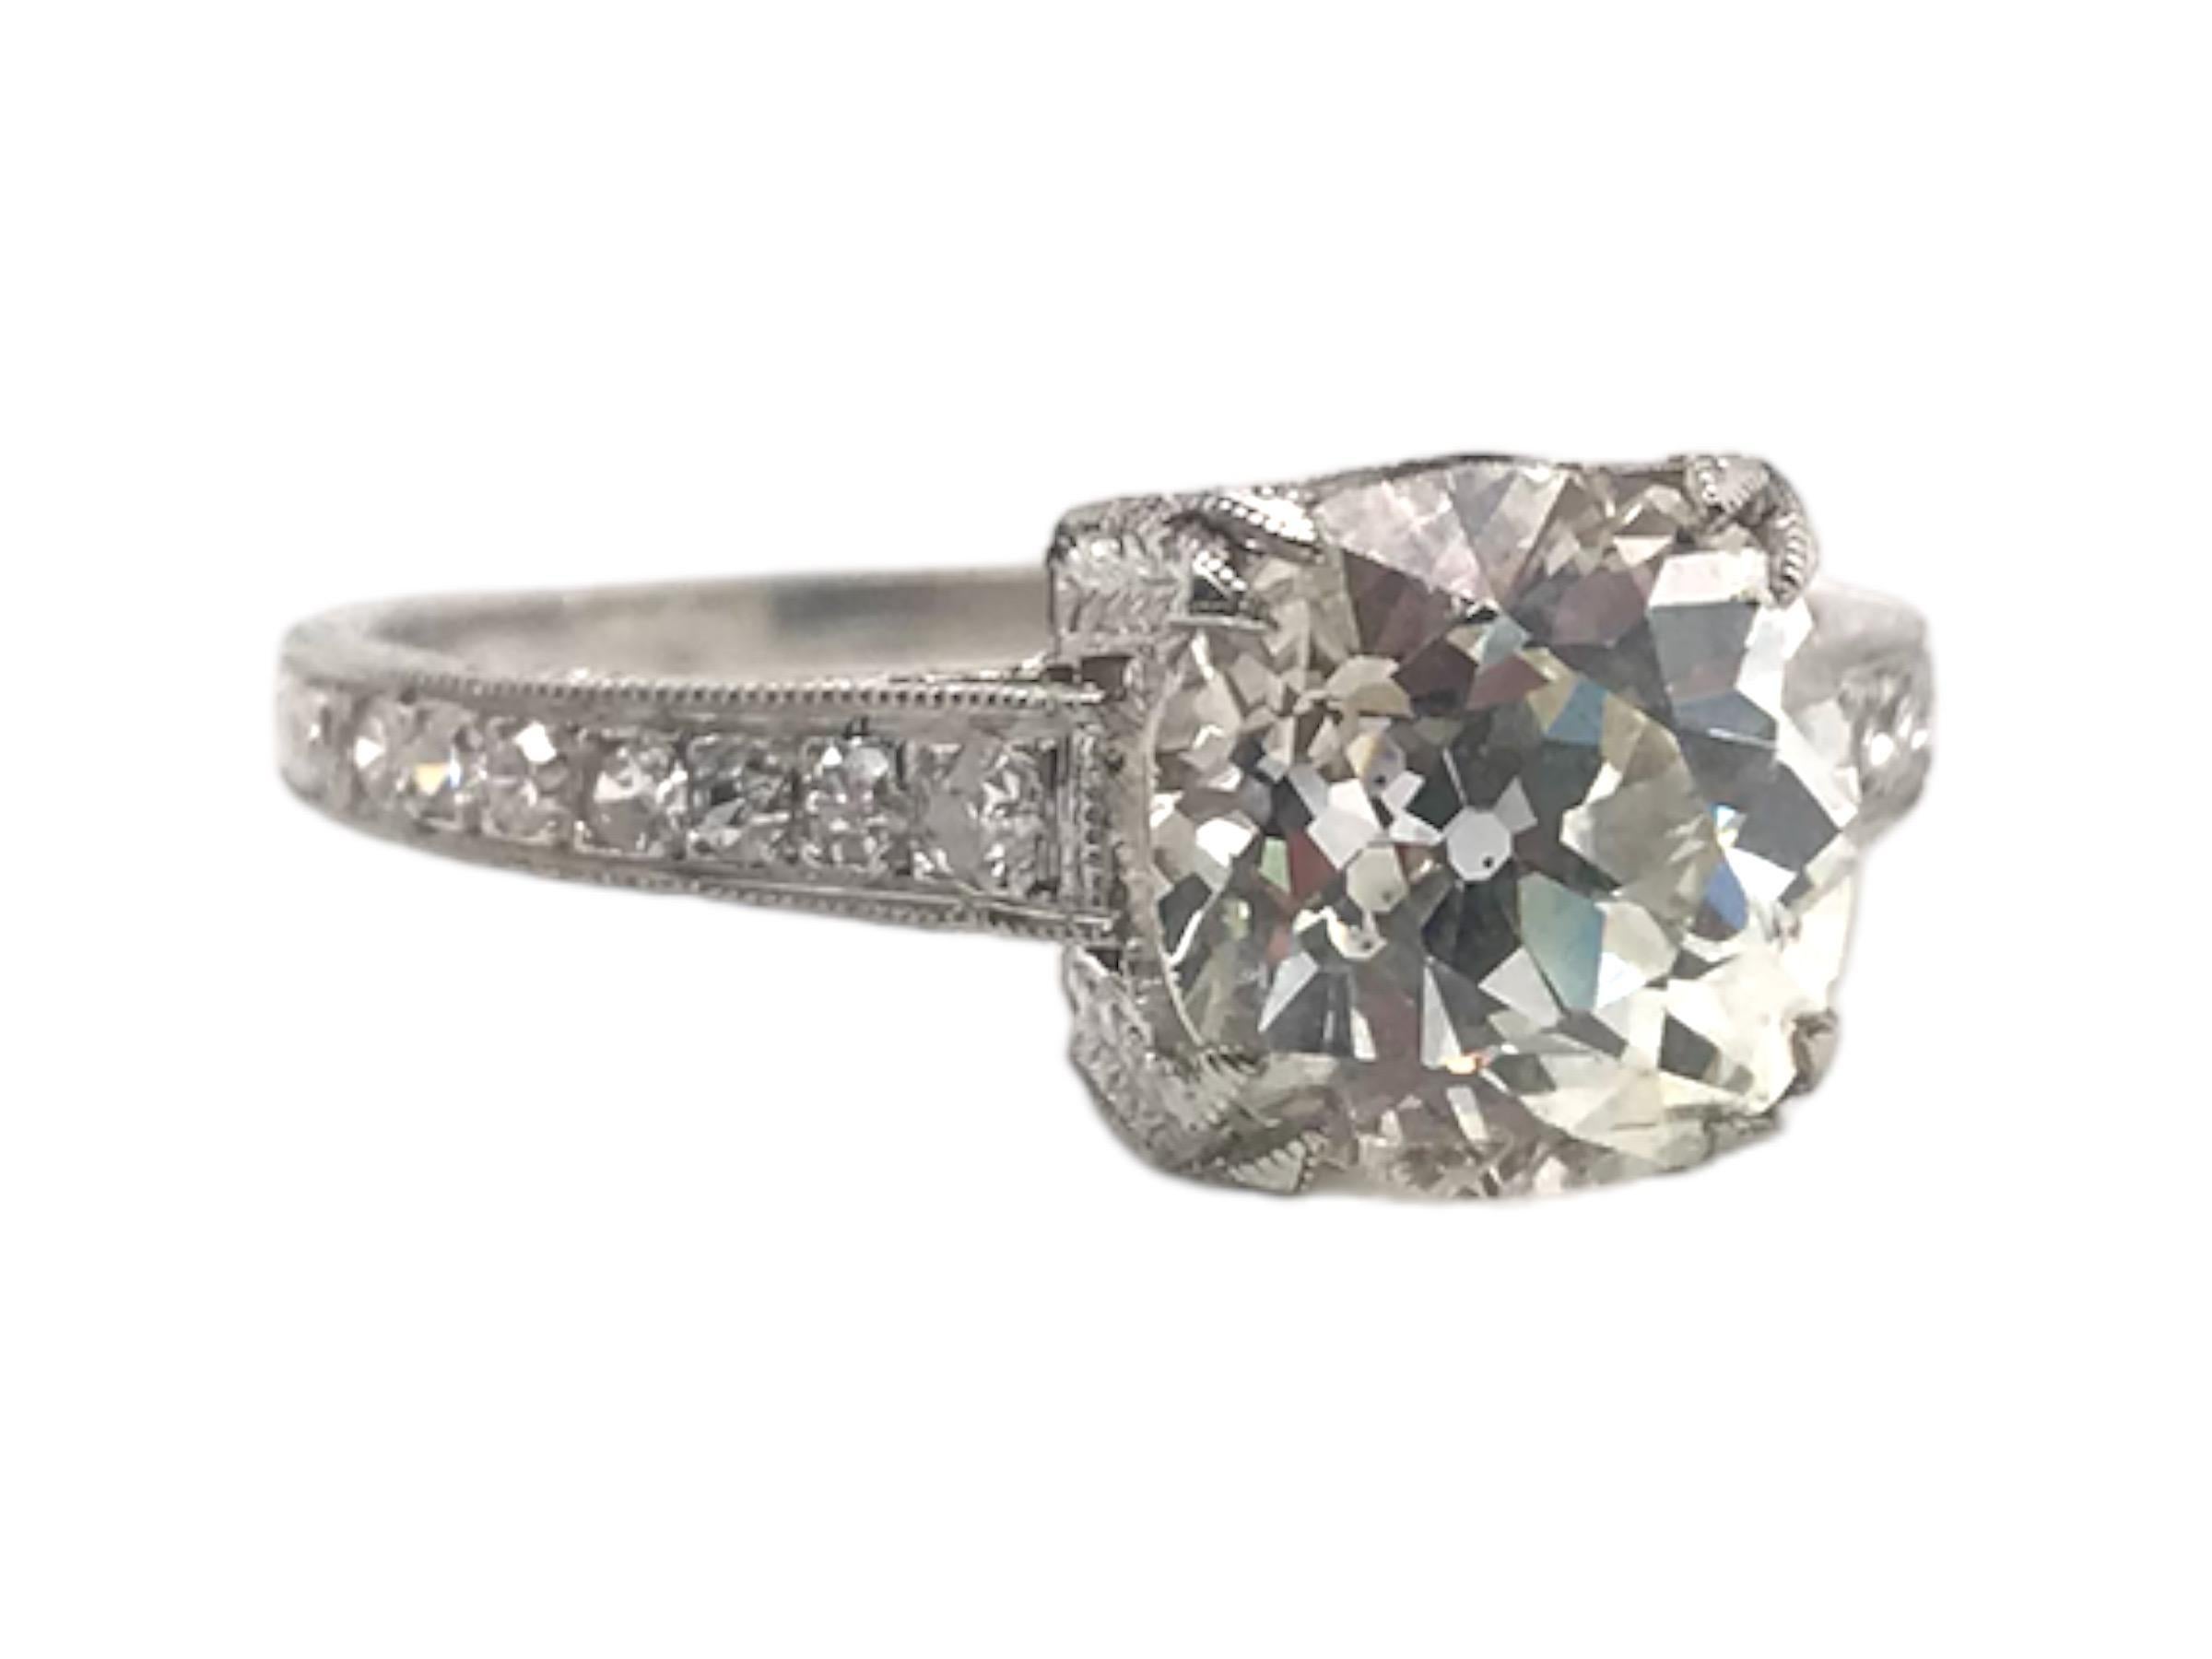 We always love a vintage solitaire style engagement ring!
This beauty is no exception!
This lovely ring is in pristine condition and is accented with fine engraving details and subtle diamond accents.

Diamond Details
Cut: Old Mine 
Weight: 2.21